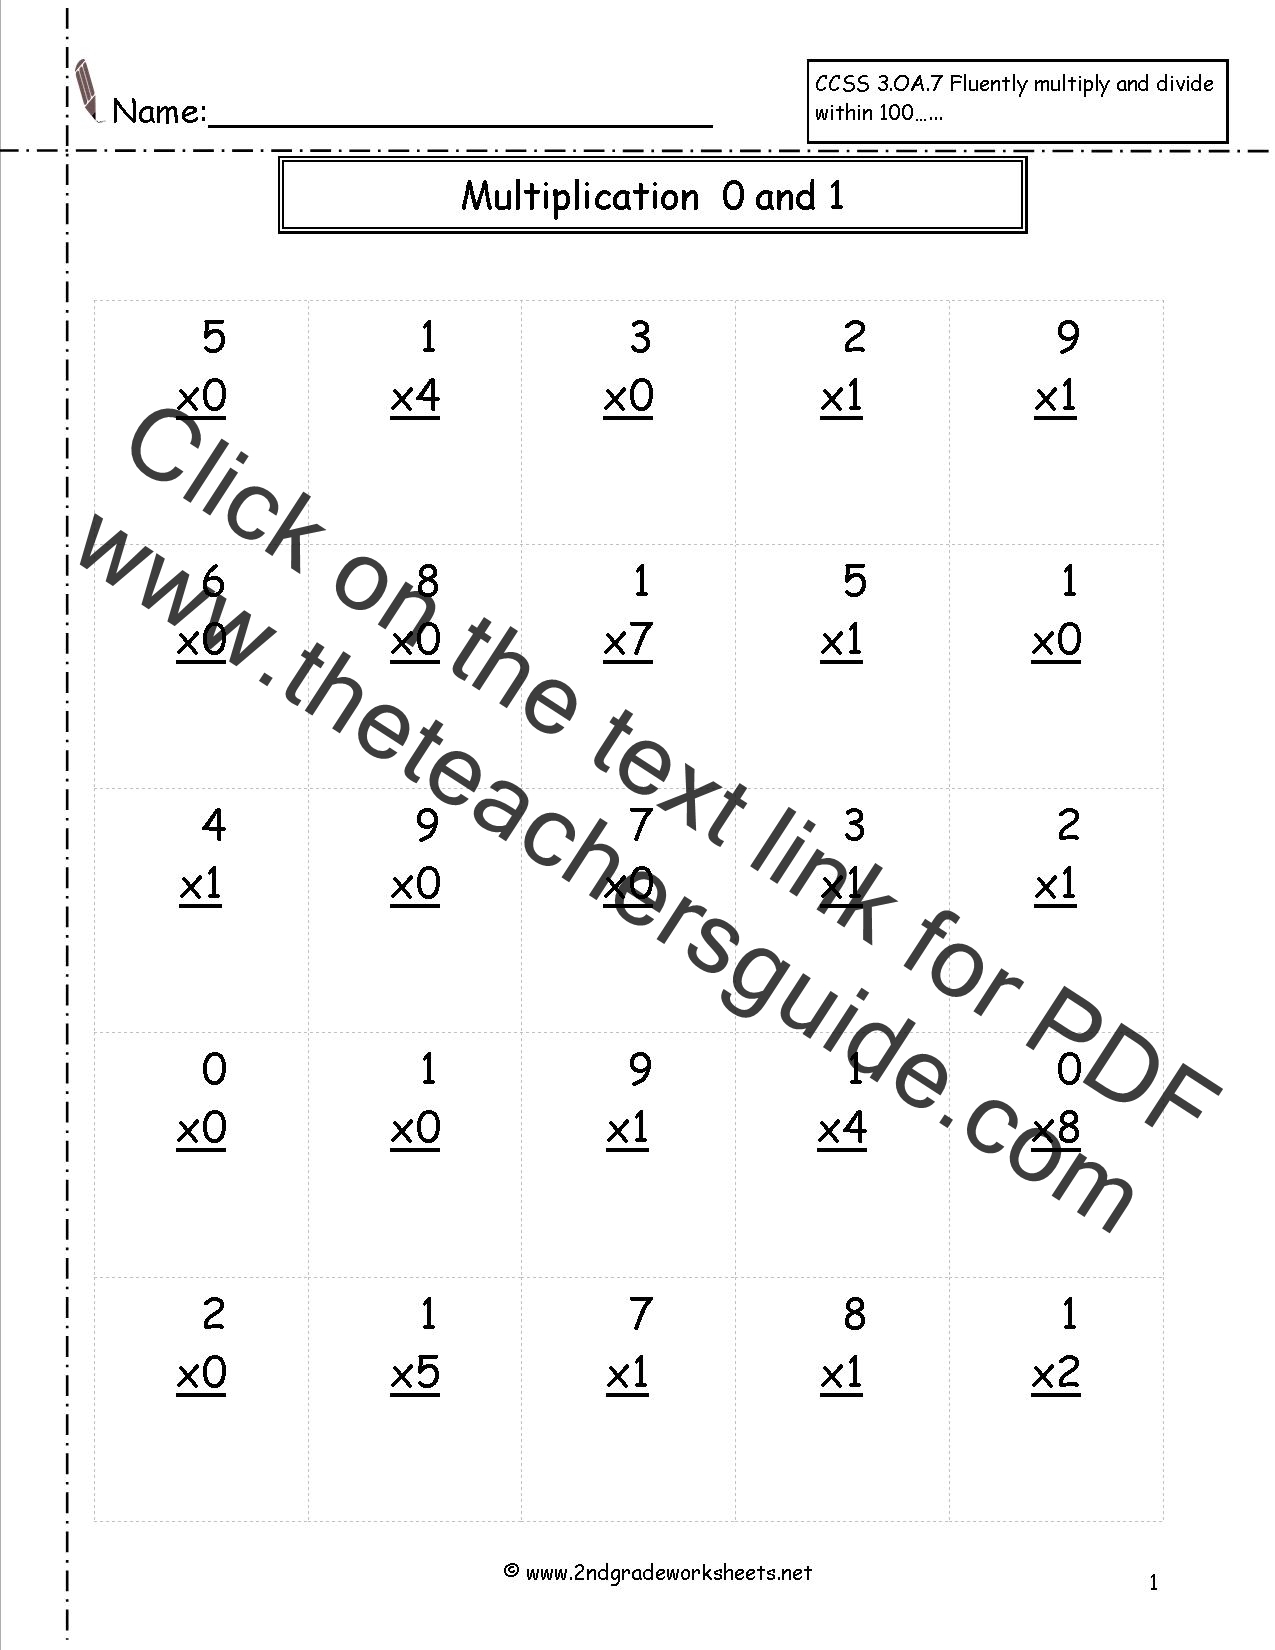 multiplication-by-1s-printable-worksheets